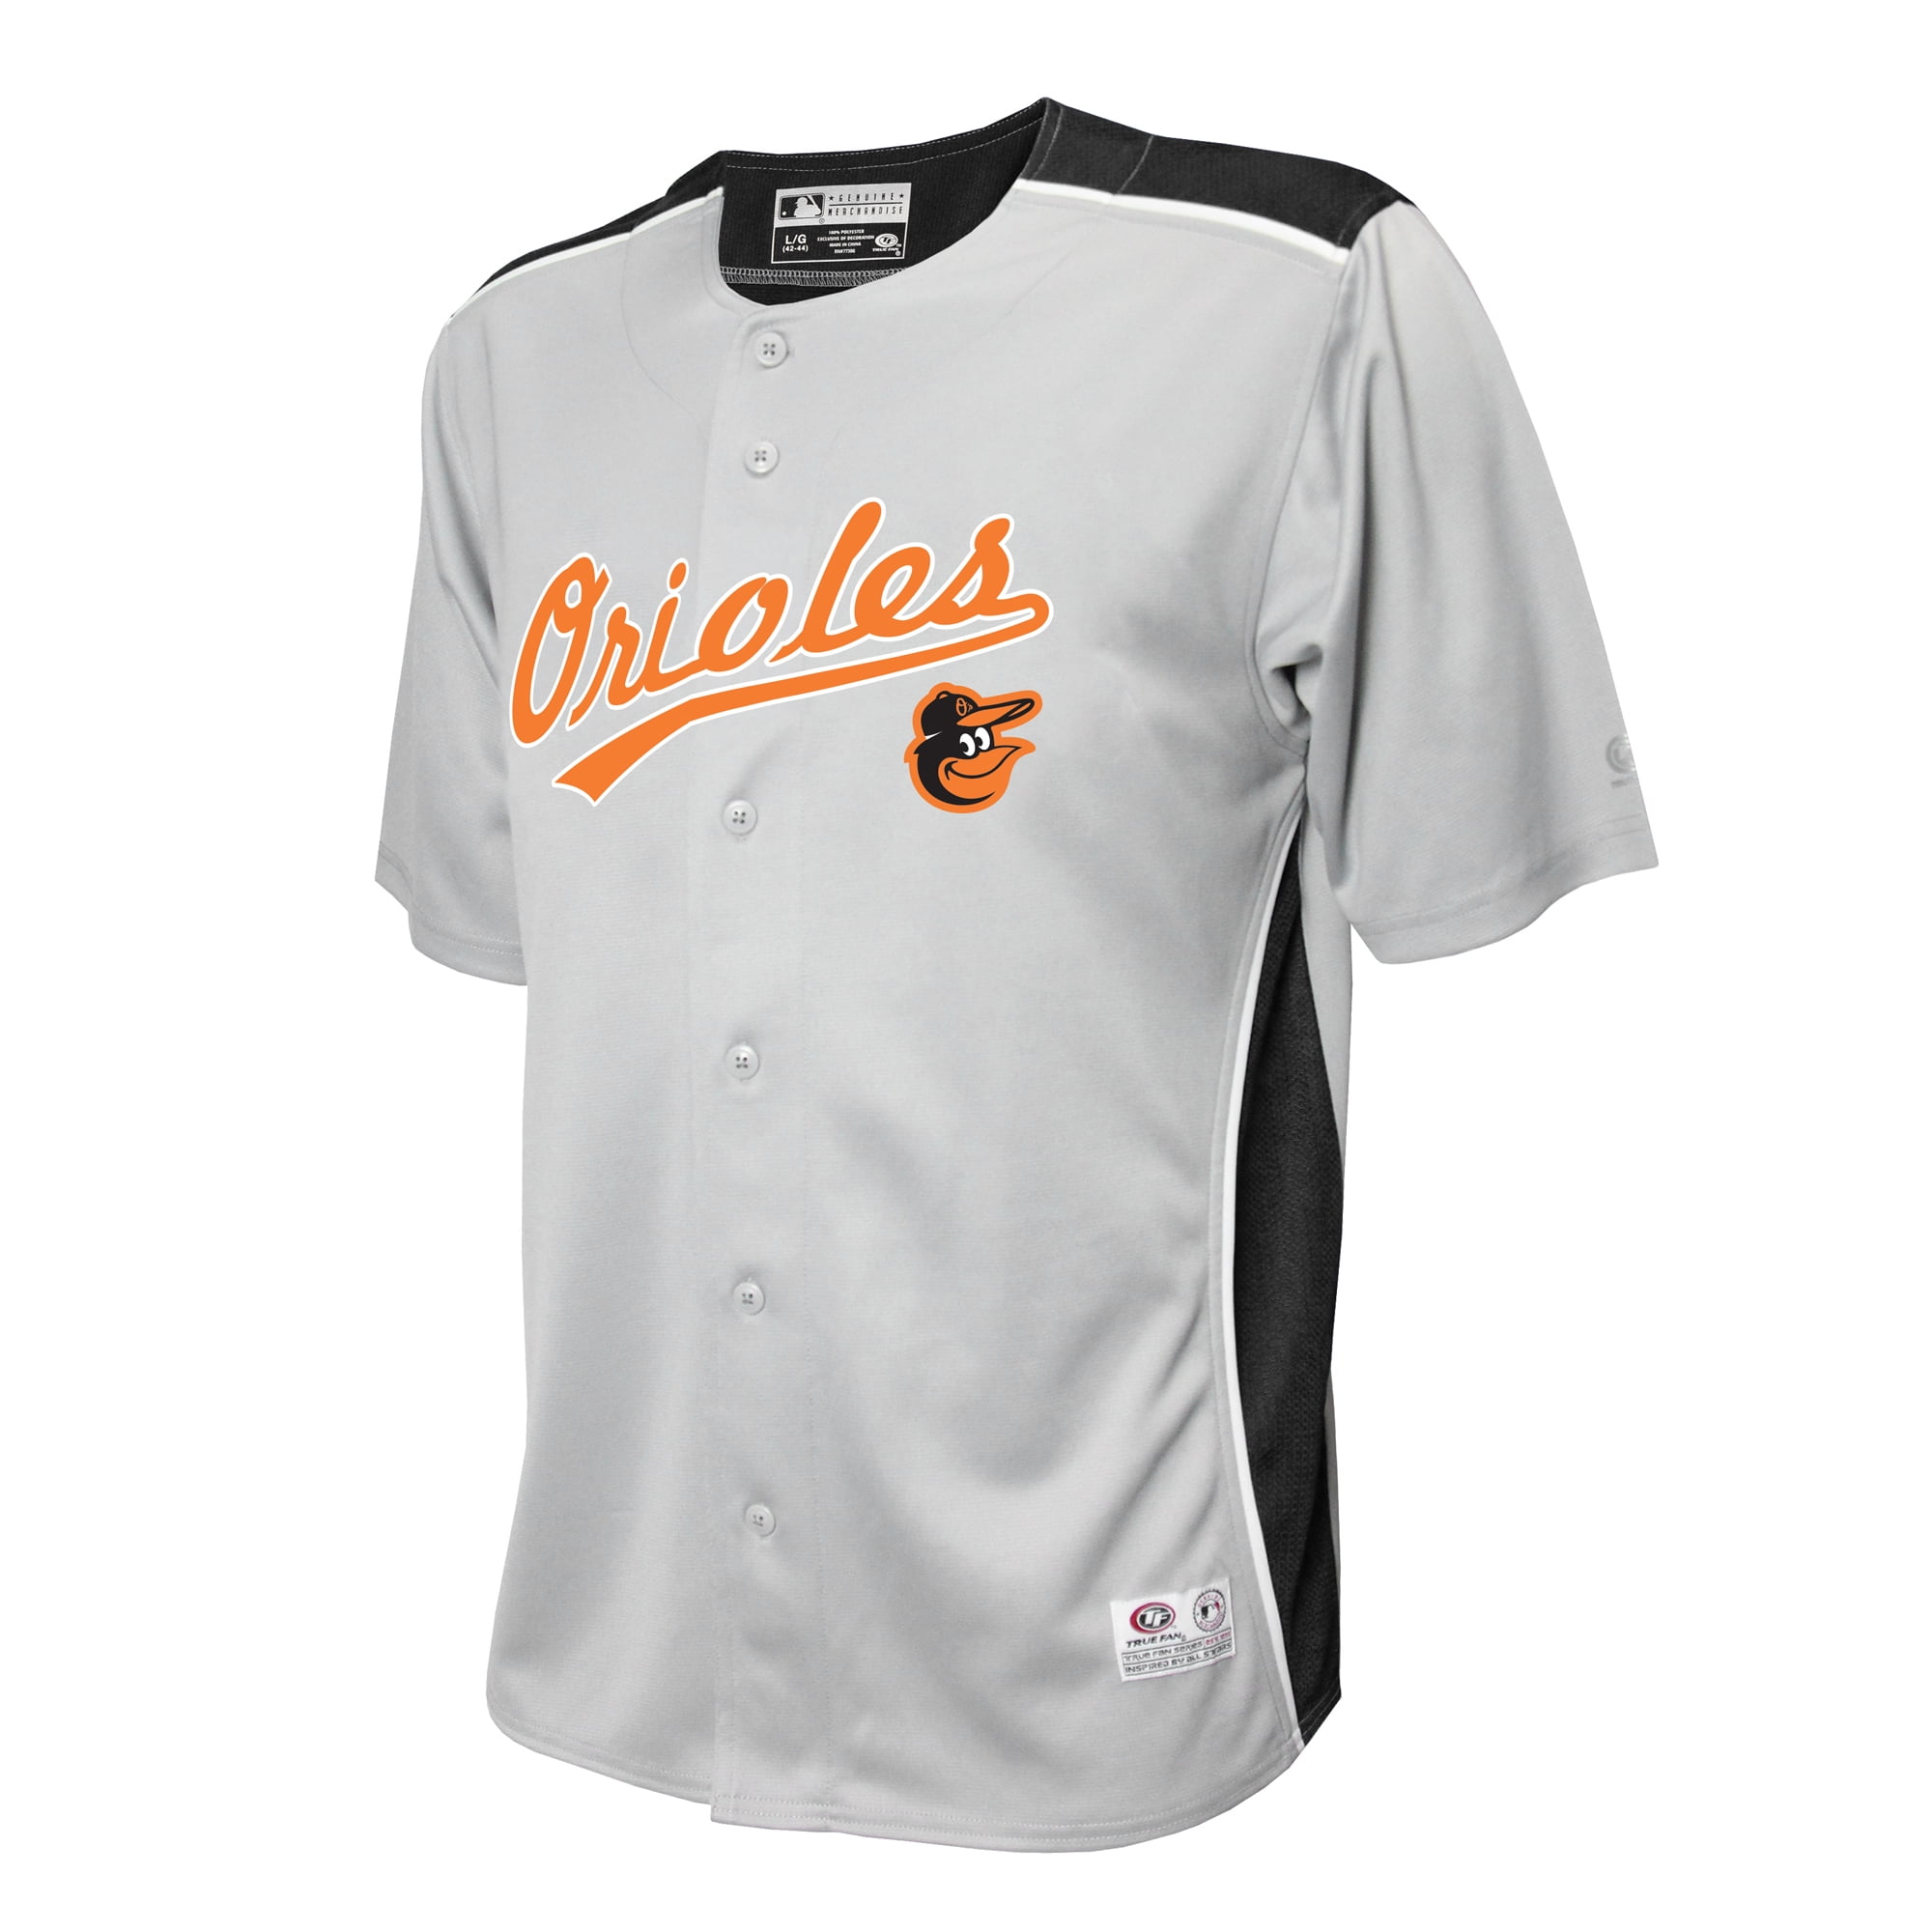 orioles button down jersey